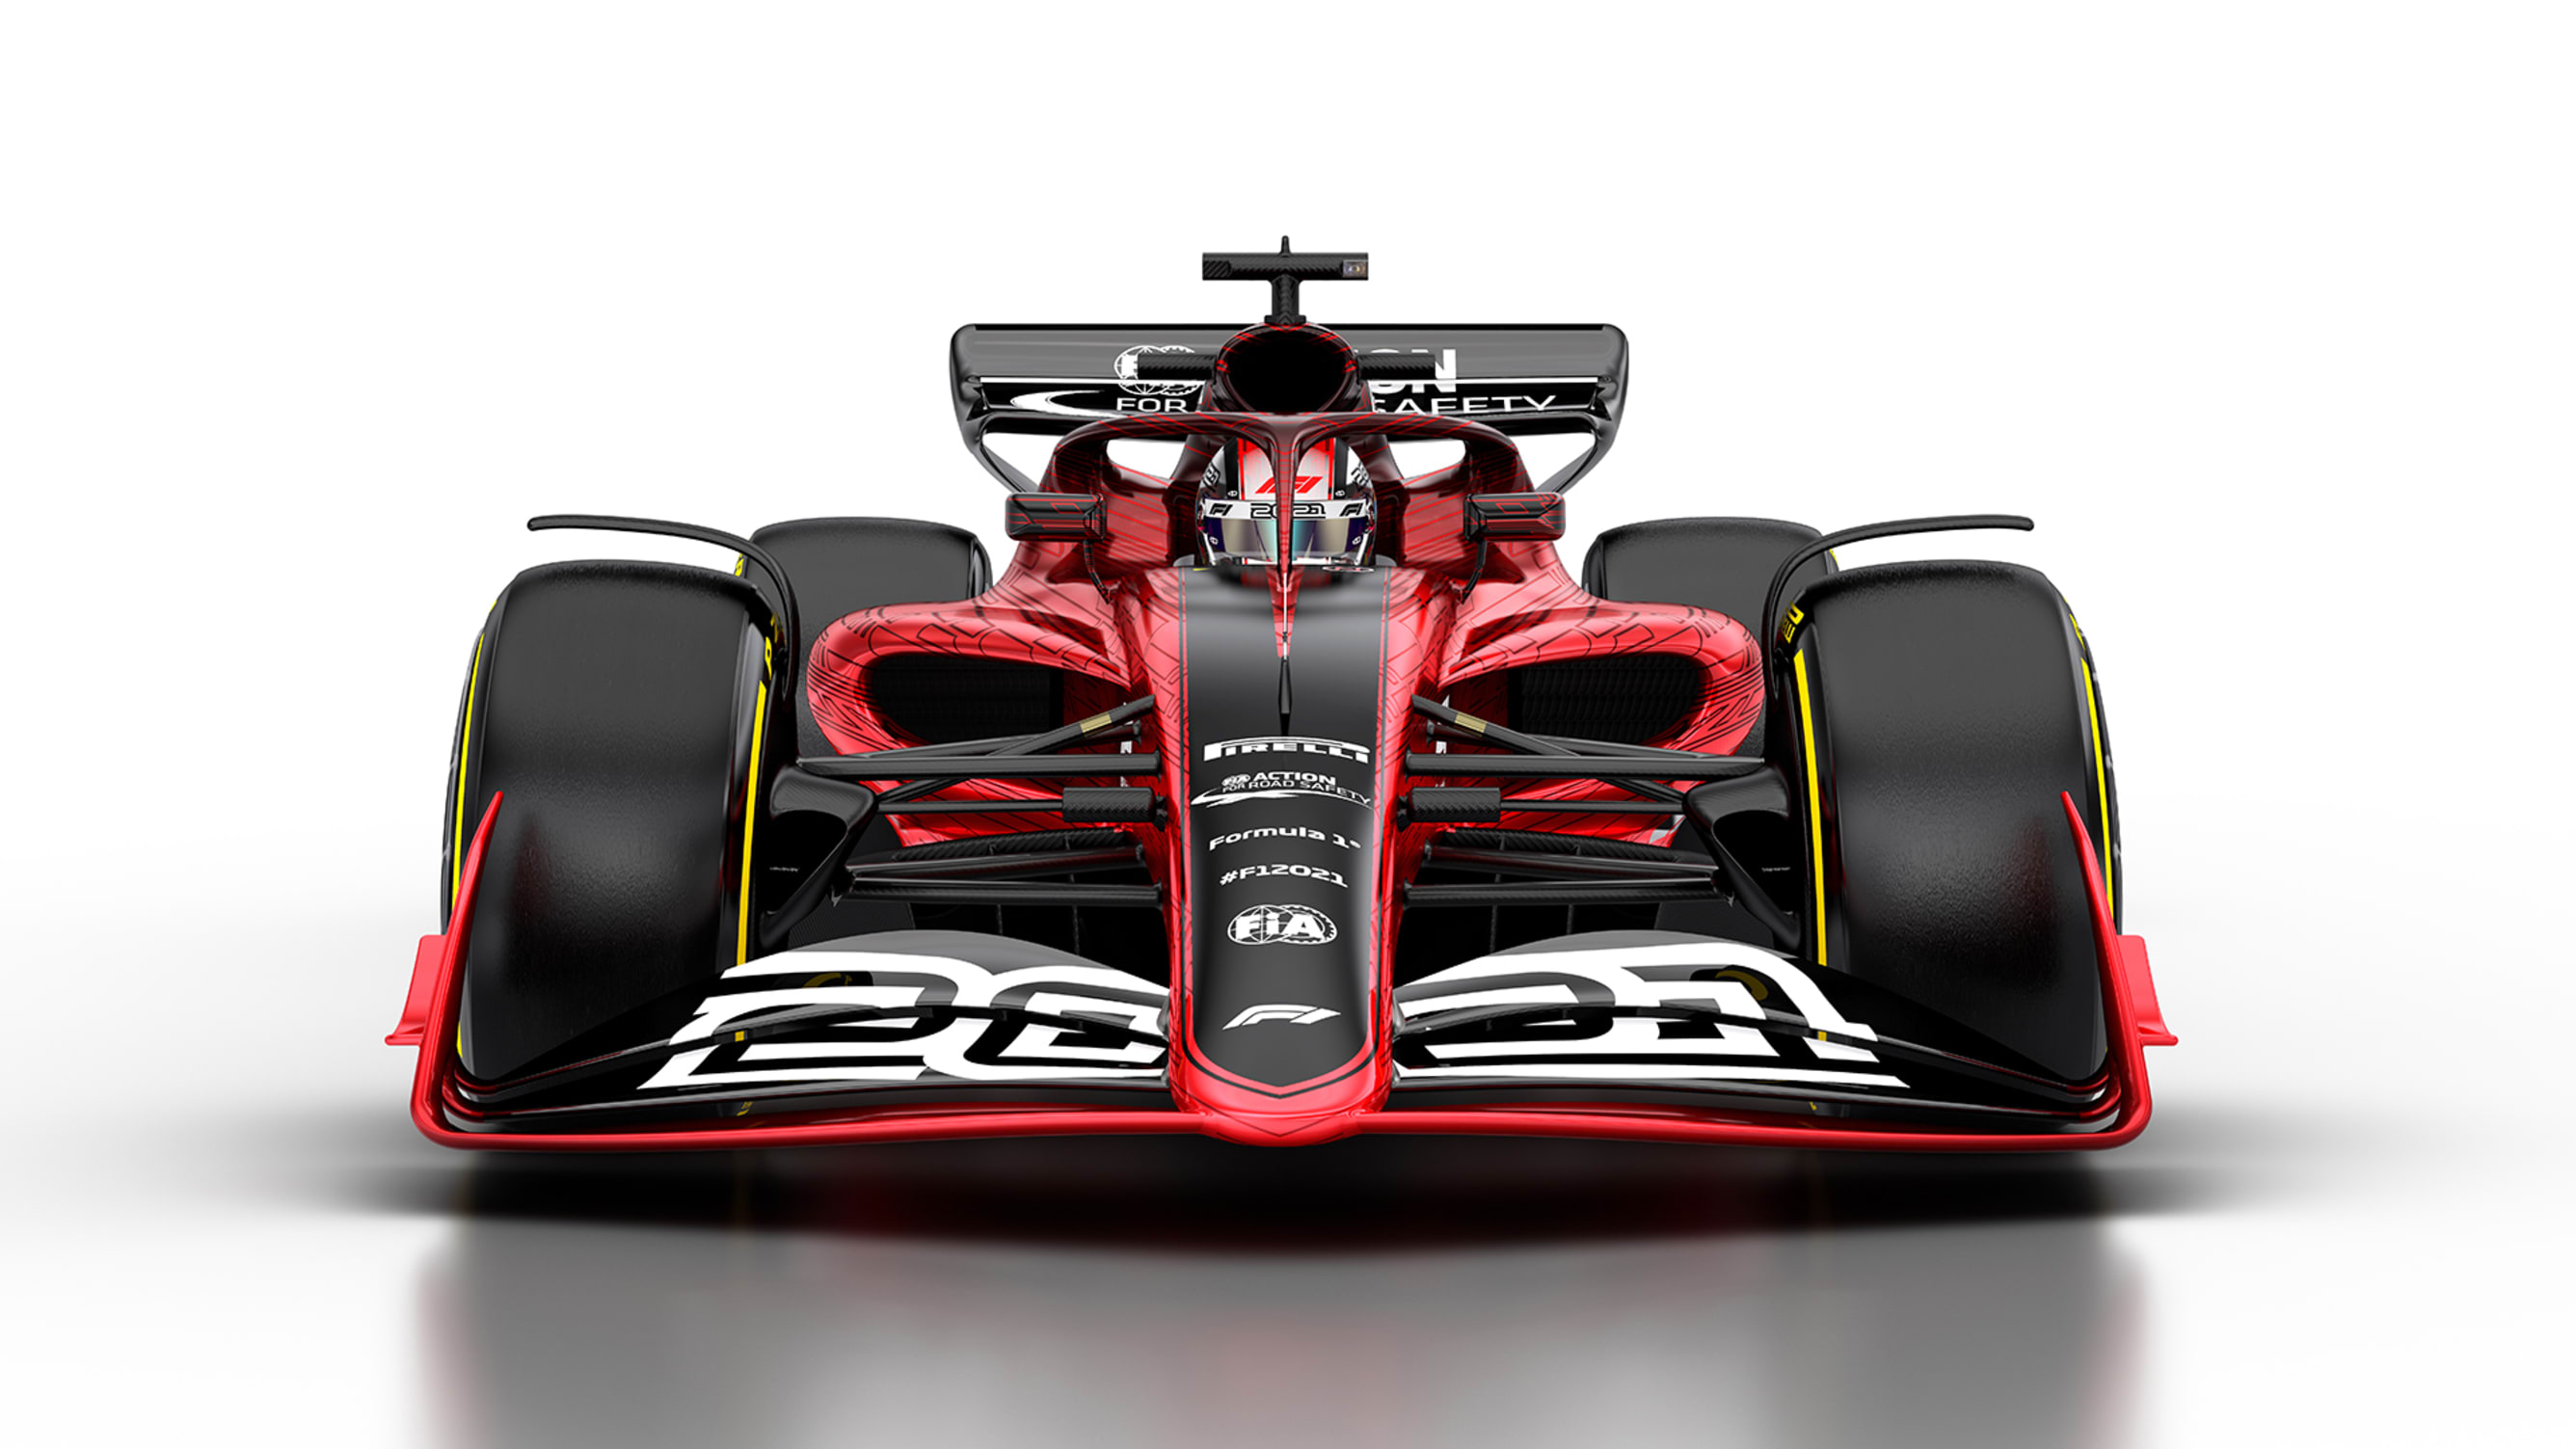 2021 F1 rules Gallery of images of the 2021 F1 car Formula 1®